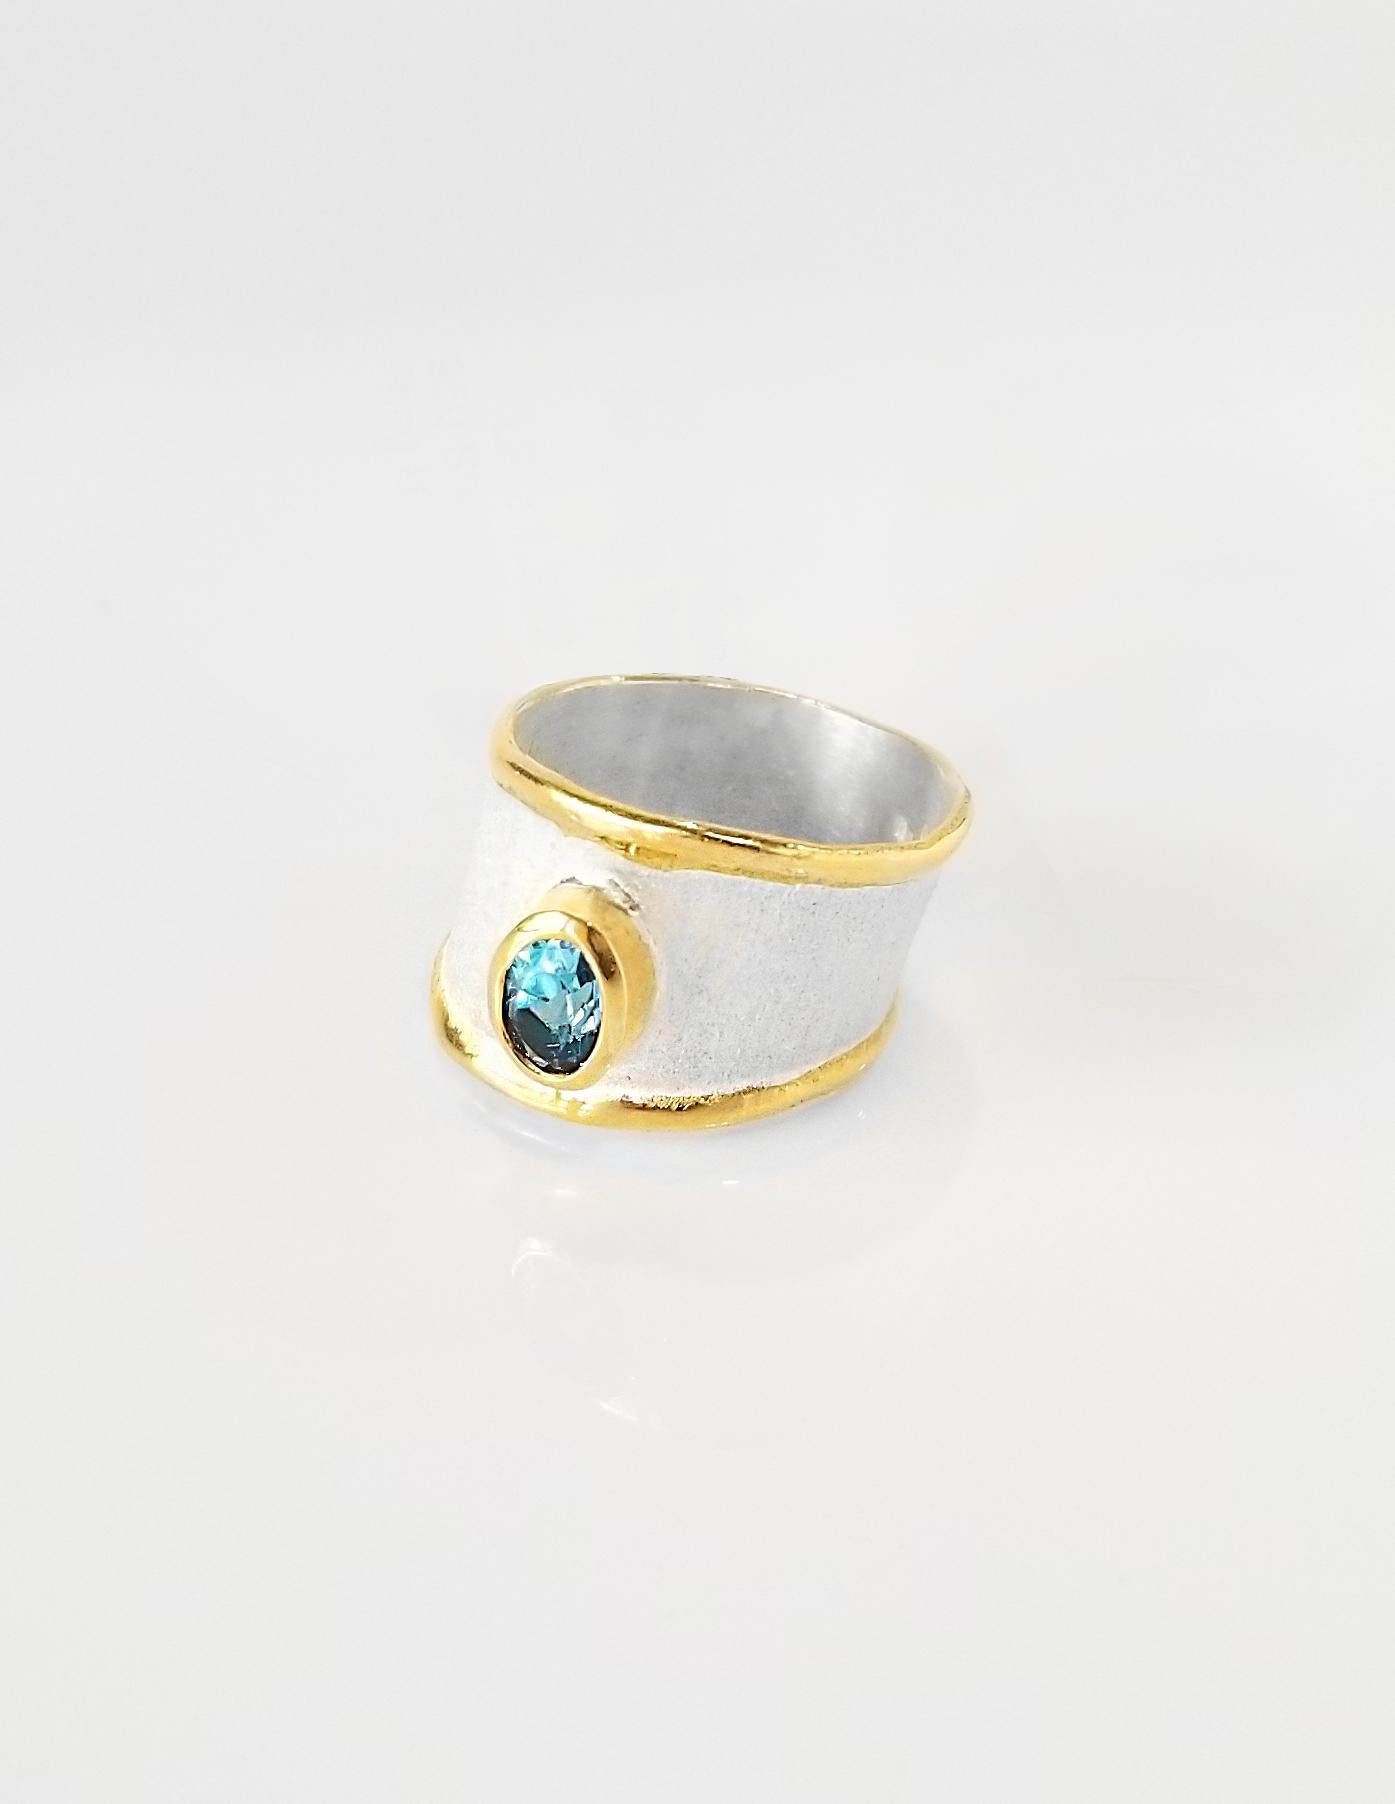 Yianni Creations Midas Collection 100% handmade artisan ring from fine silver 950 purity coated with palladium to protect the jewel against elements. Shiny liquid edges are plated with a thick overlay of 24 Karat yellow gold features 1.10 Carat